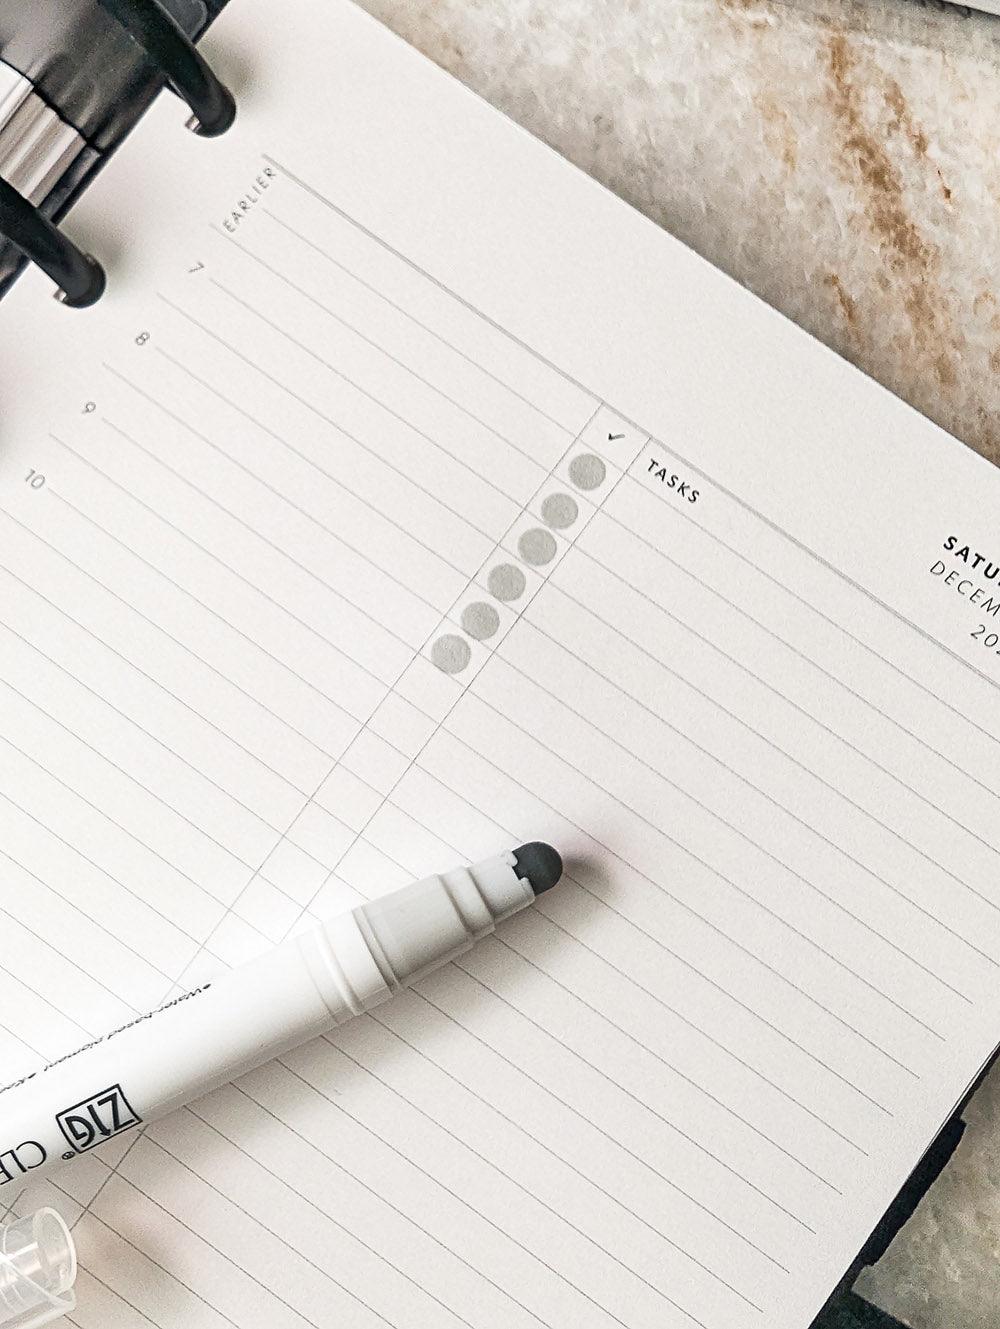 ZIG brand color dot highlighting marker in a platinum gray color for planning in your discbound or six ring planner systems and disc notebooks by Jane's Agenda.